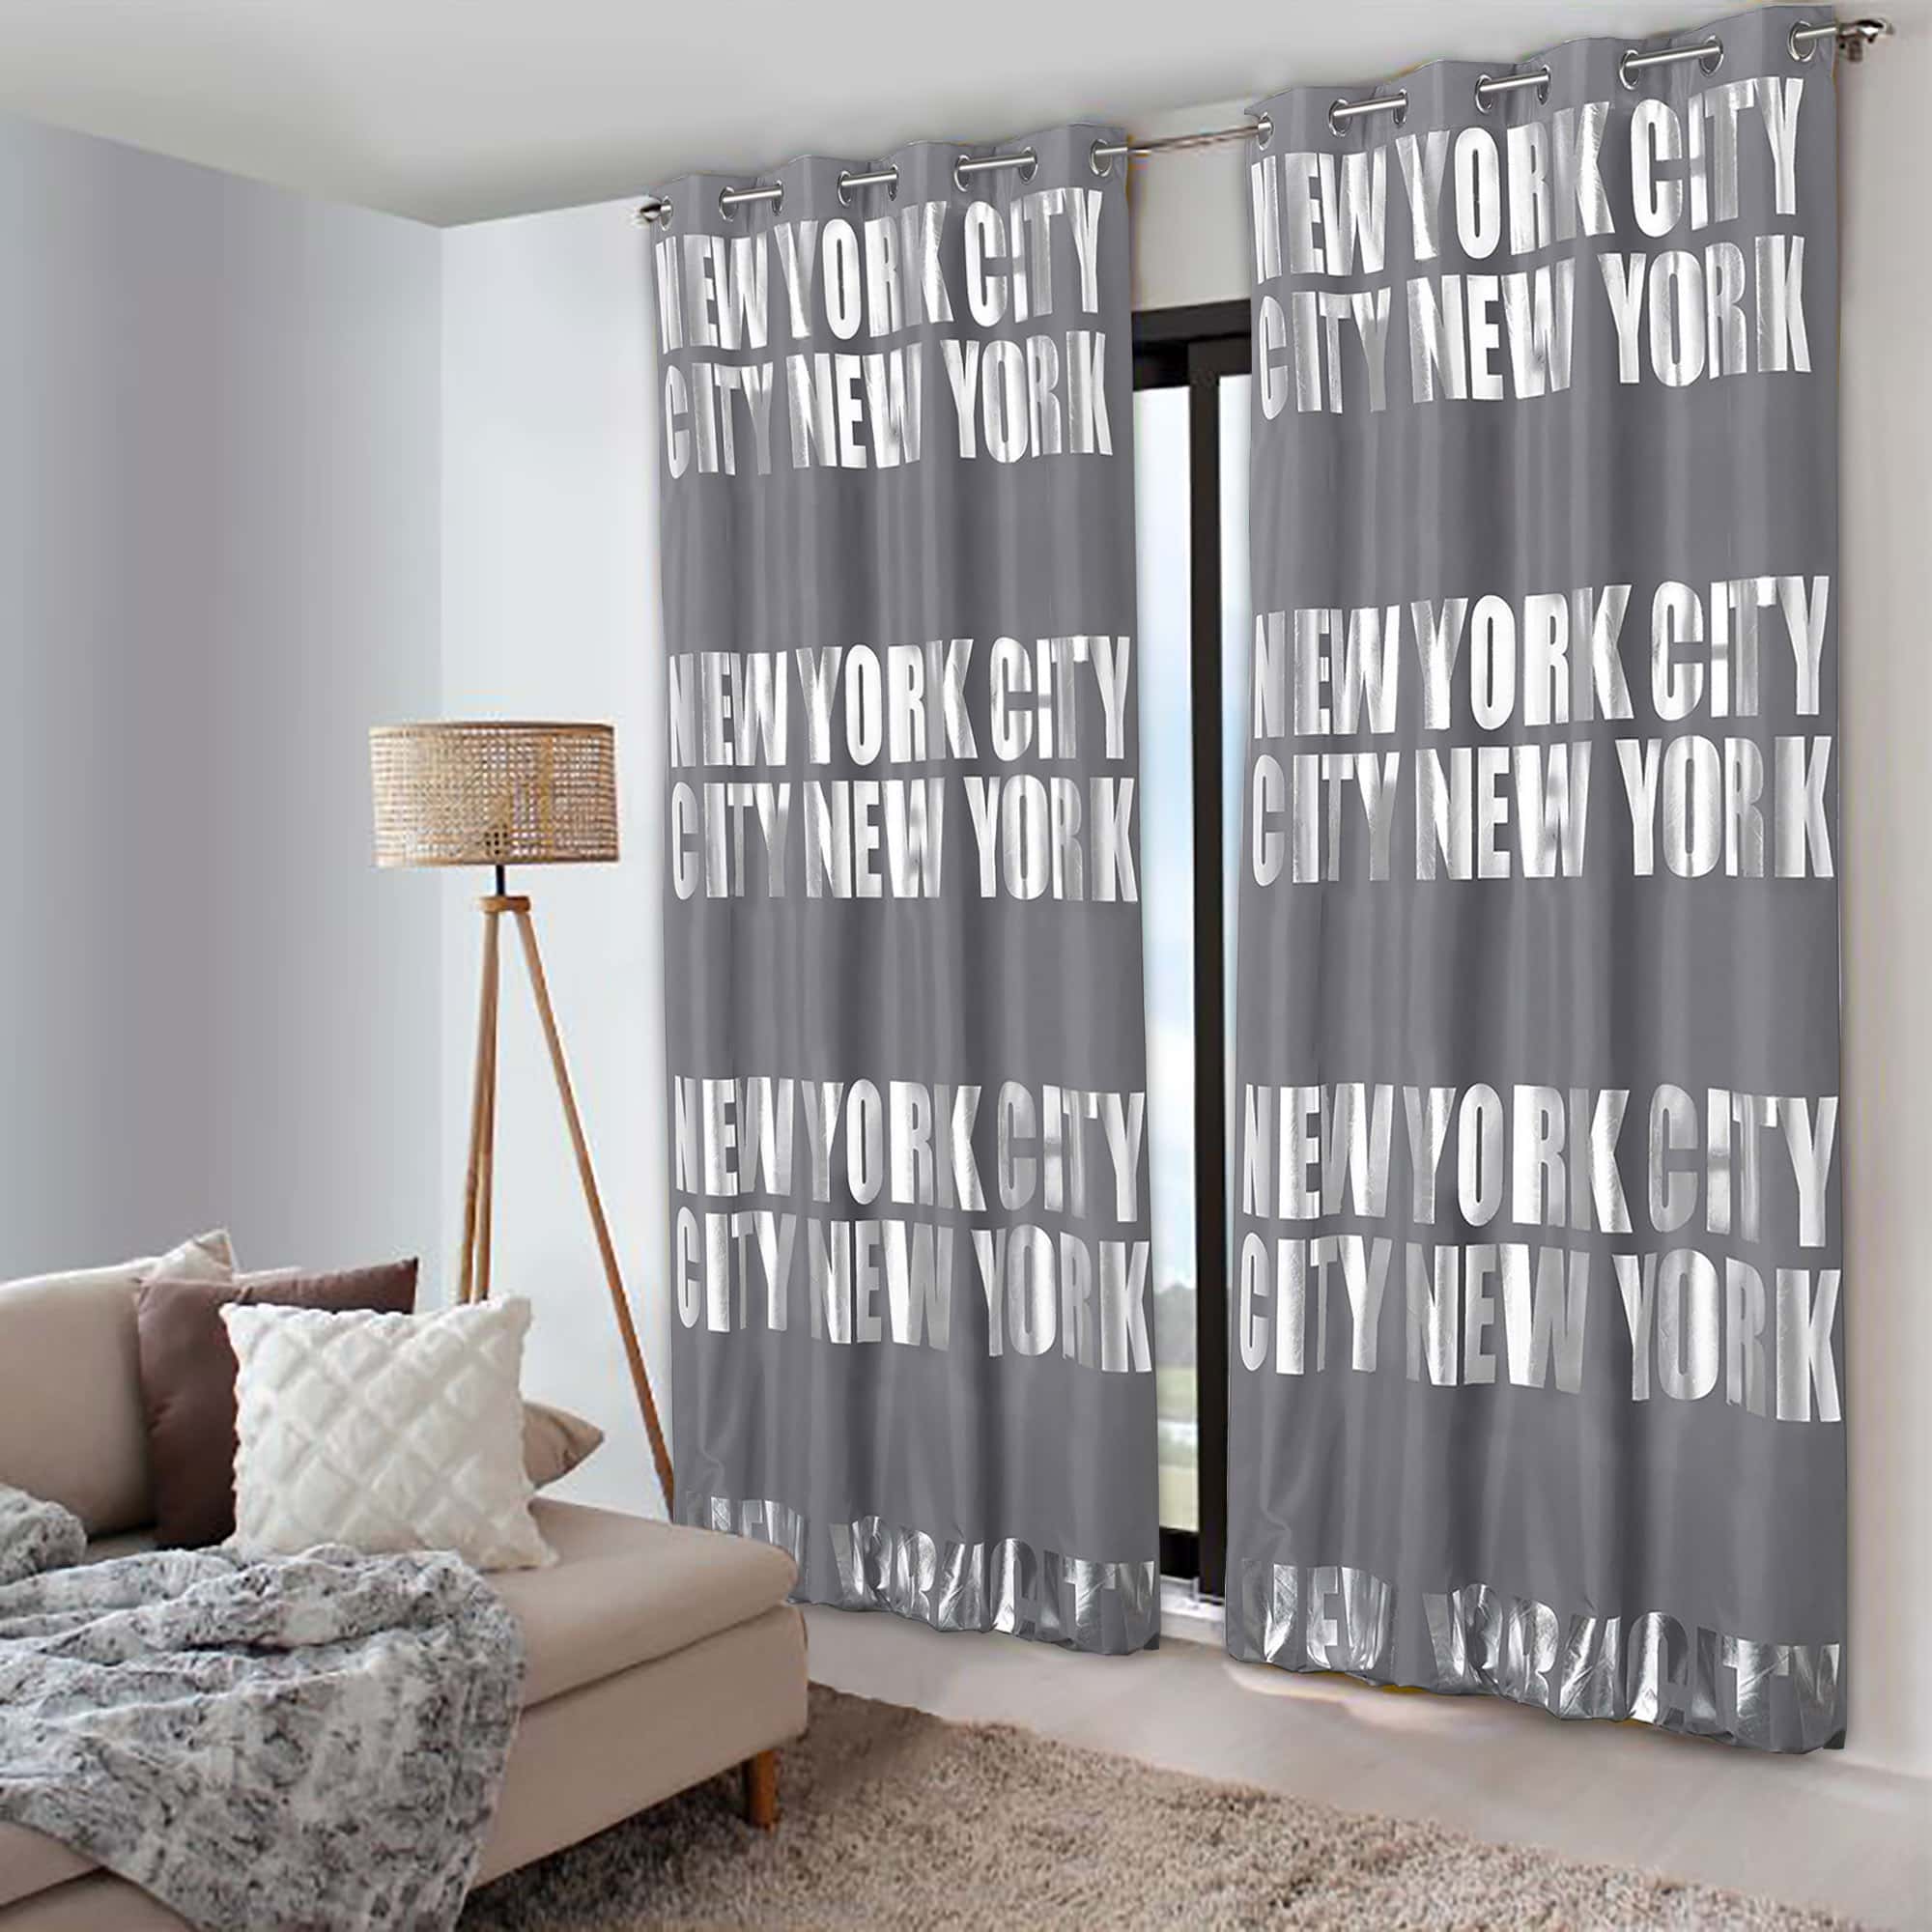 gorgeous drapes in timeless grey with print for modern interior perfect for teen room bedroom living room office